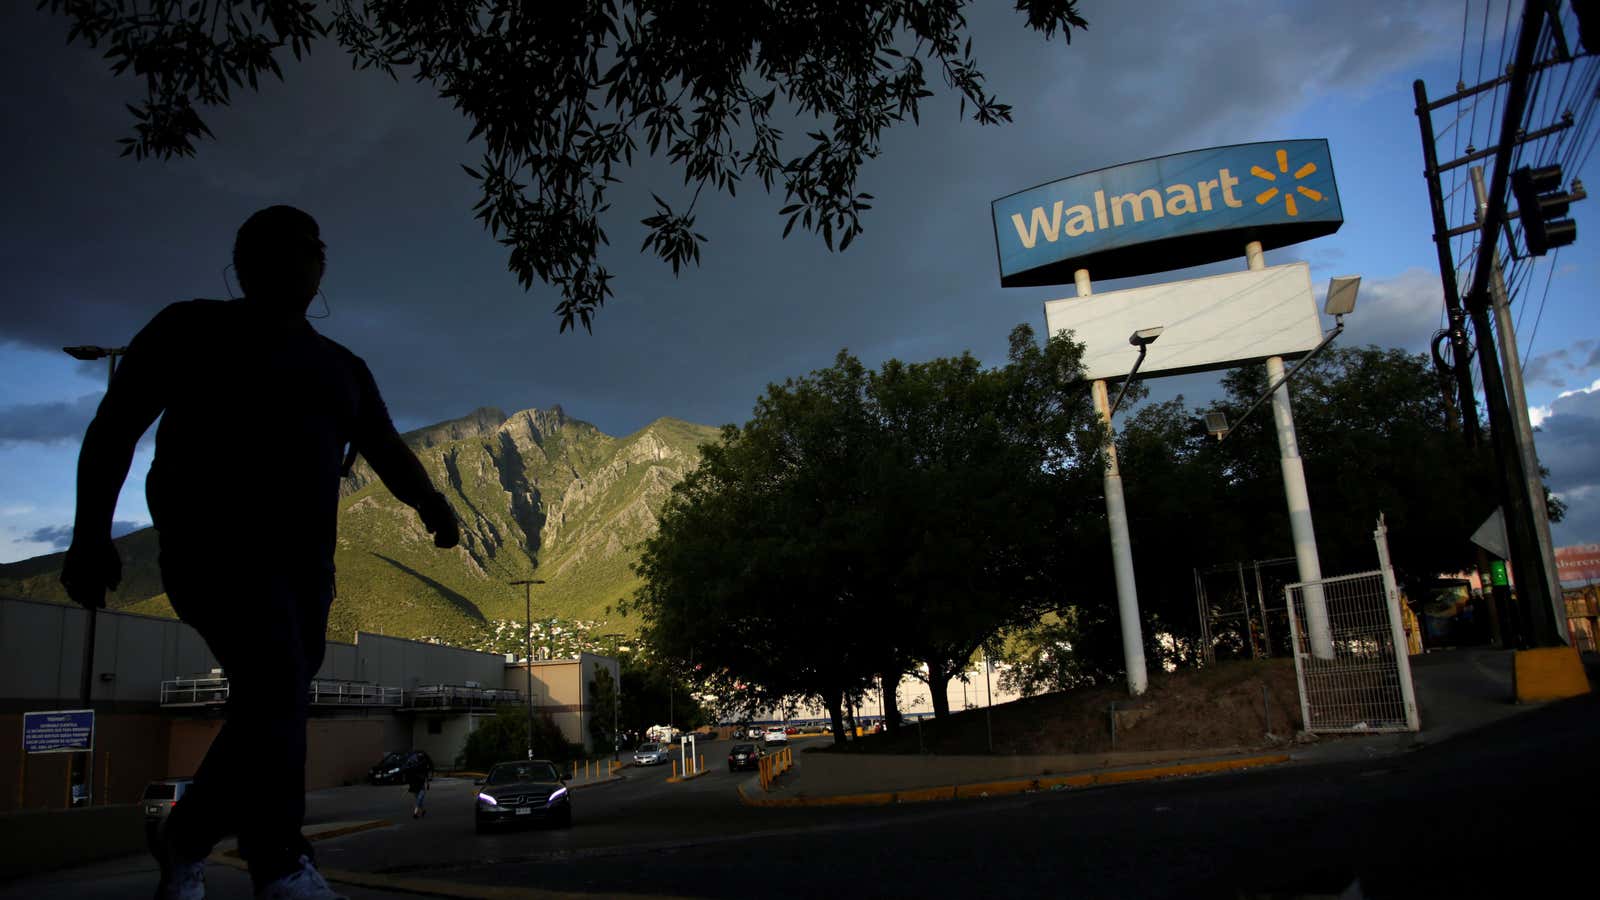 Walmart believes it can supercharge its retail business in Mexico by grabbing a larger share of remittances to the country.